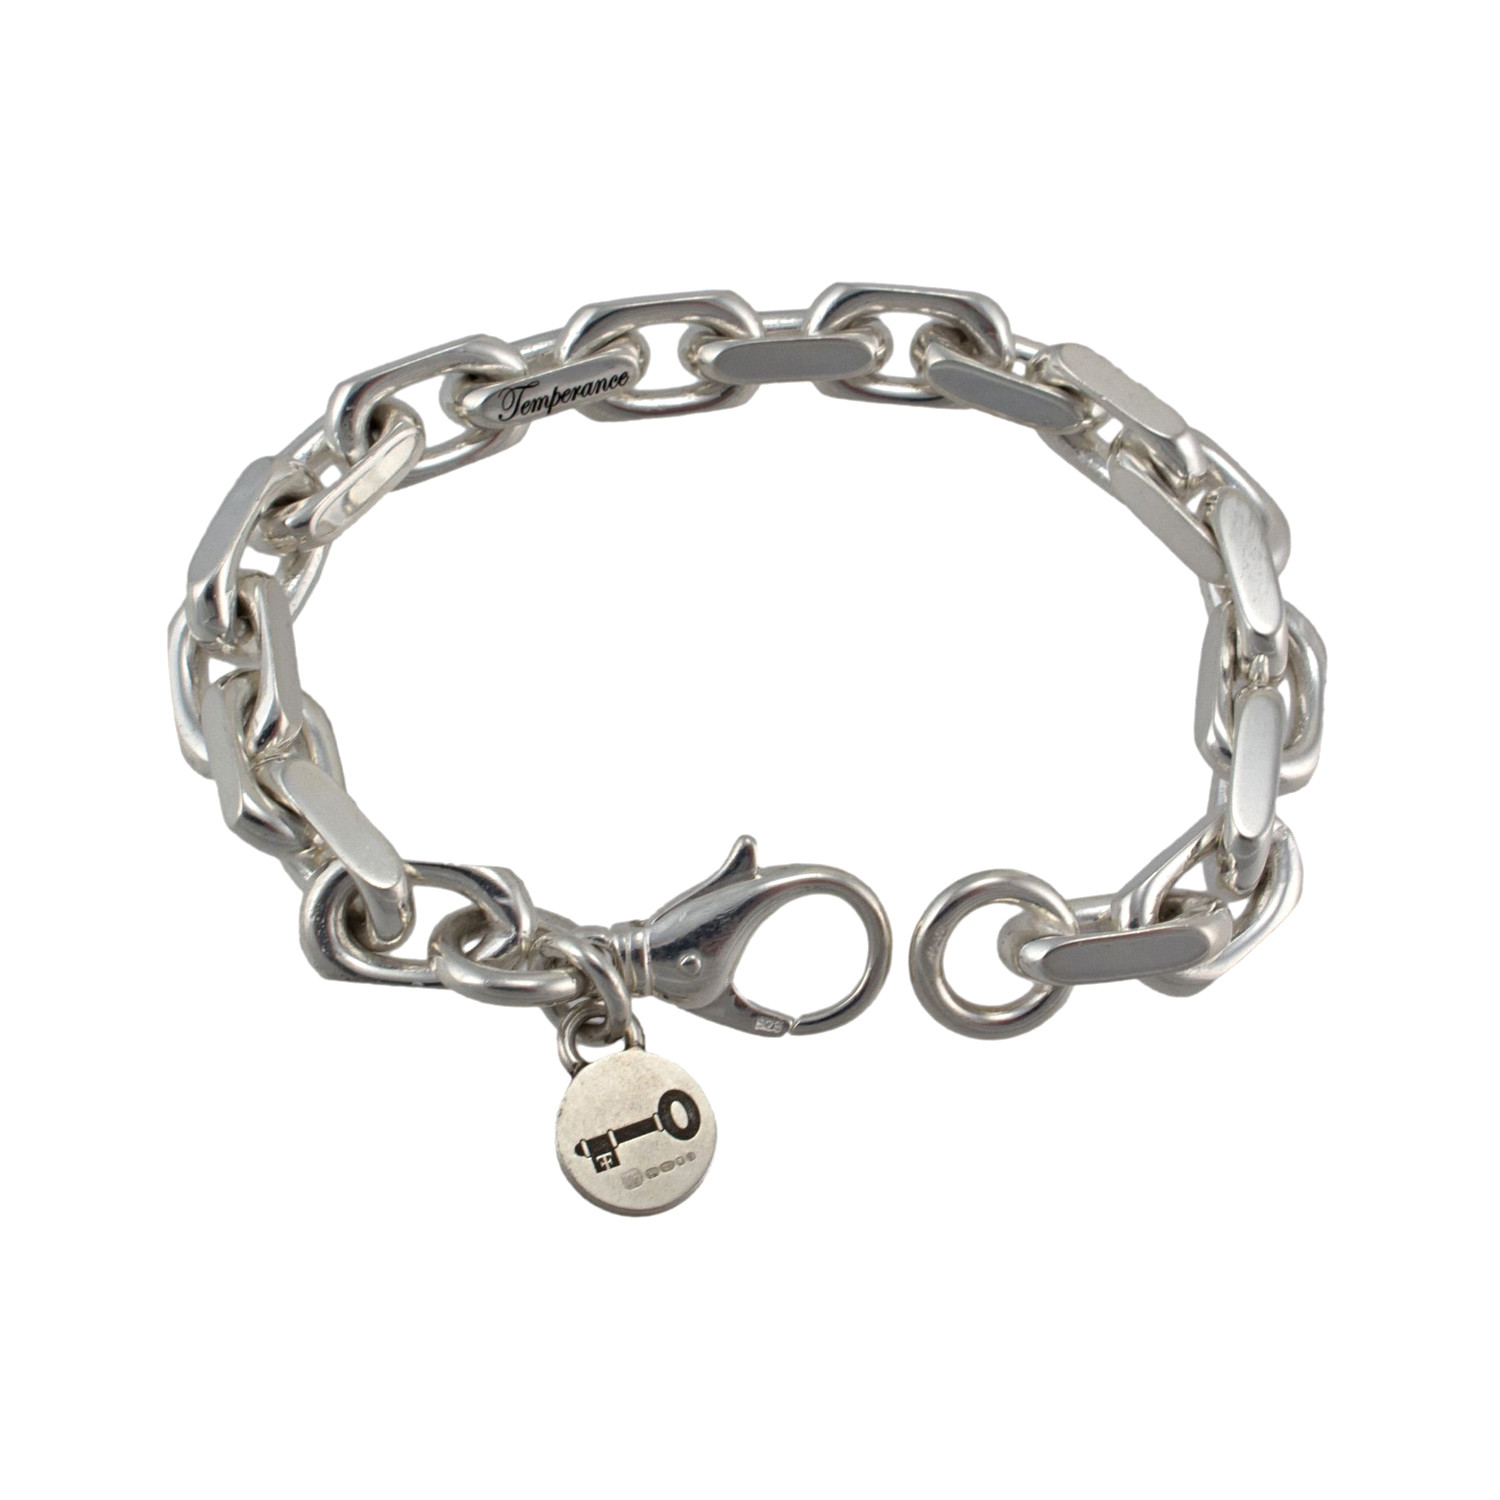 Theo Fennell Alias Gluttony & Temperance Bracelet - Theo Fennell ...